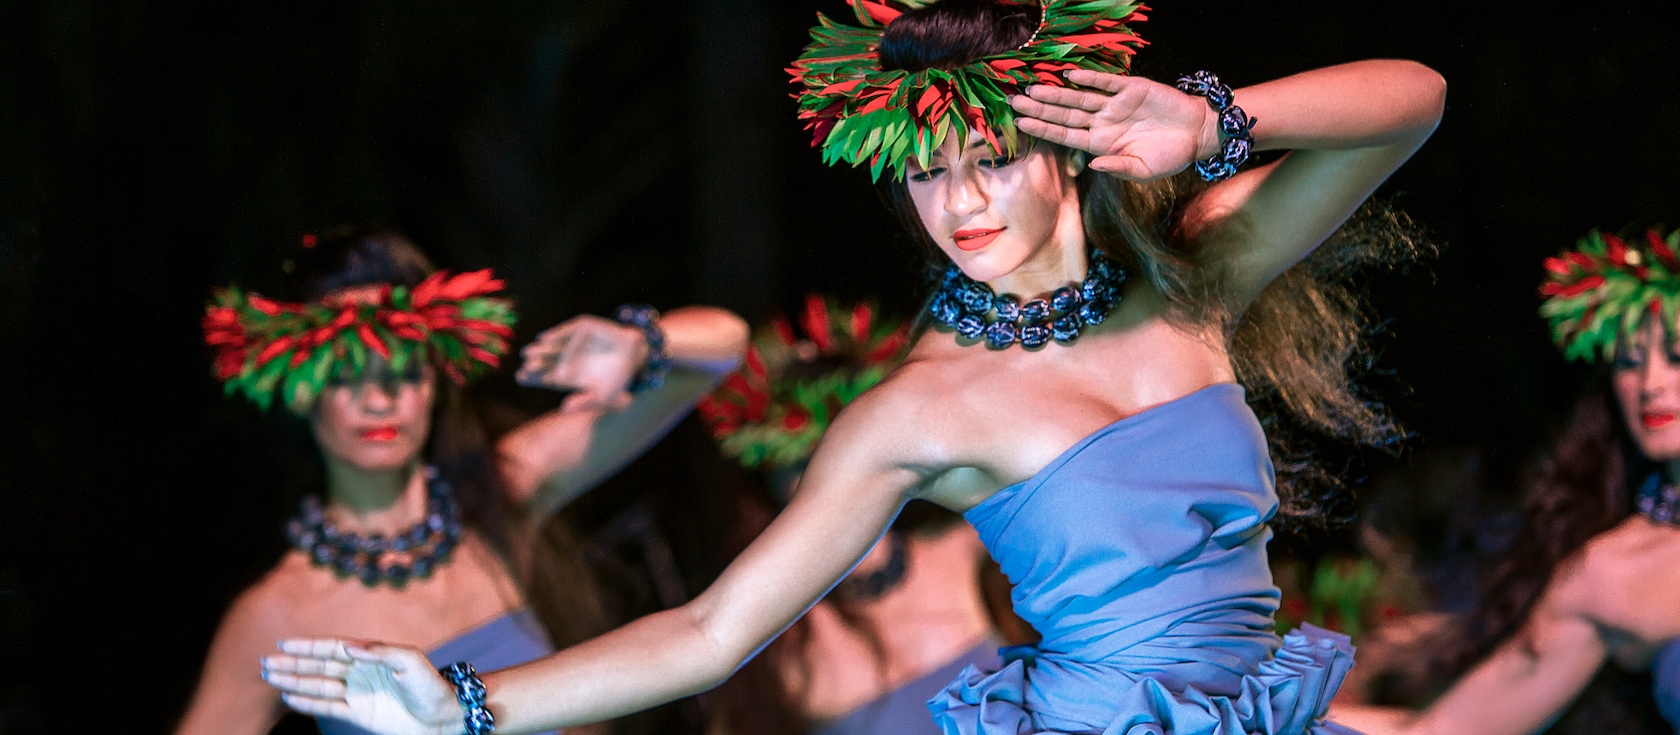 A group of Hawaiian women in traditional outfits and leafy head dresses perform an island dance at the Ka Wa'a Luau